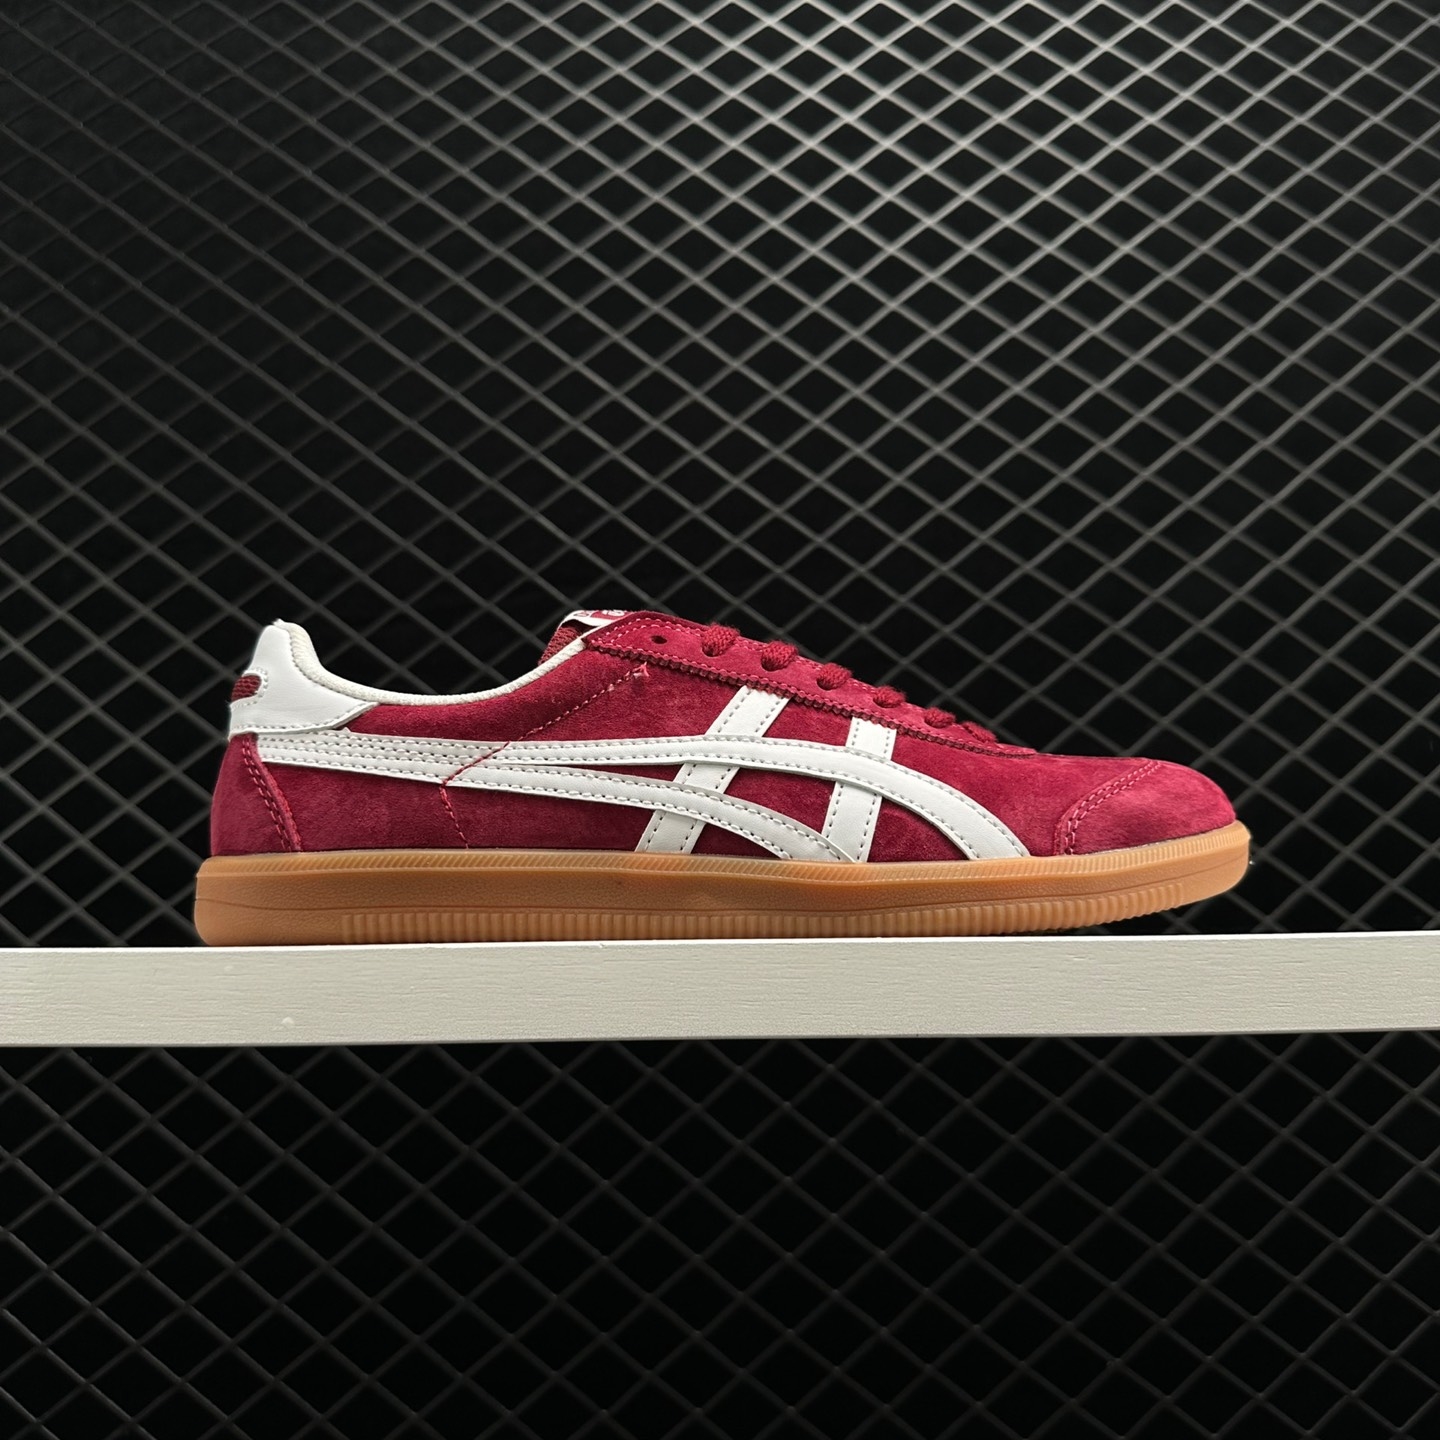 Onitsuka Tiger Tokuten Burgundy White Sneakers - Top Quality Athletic Footwear